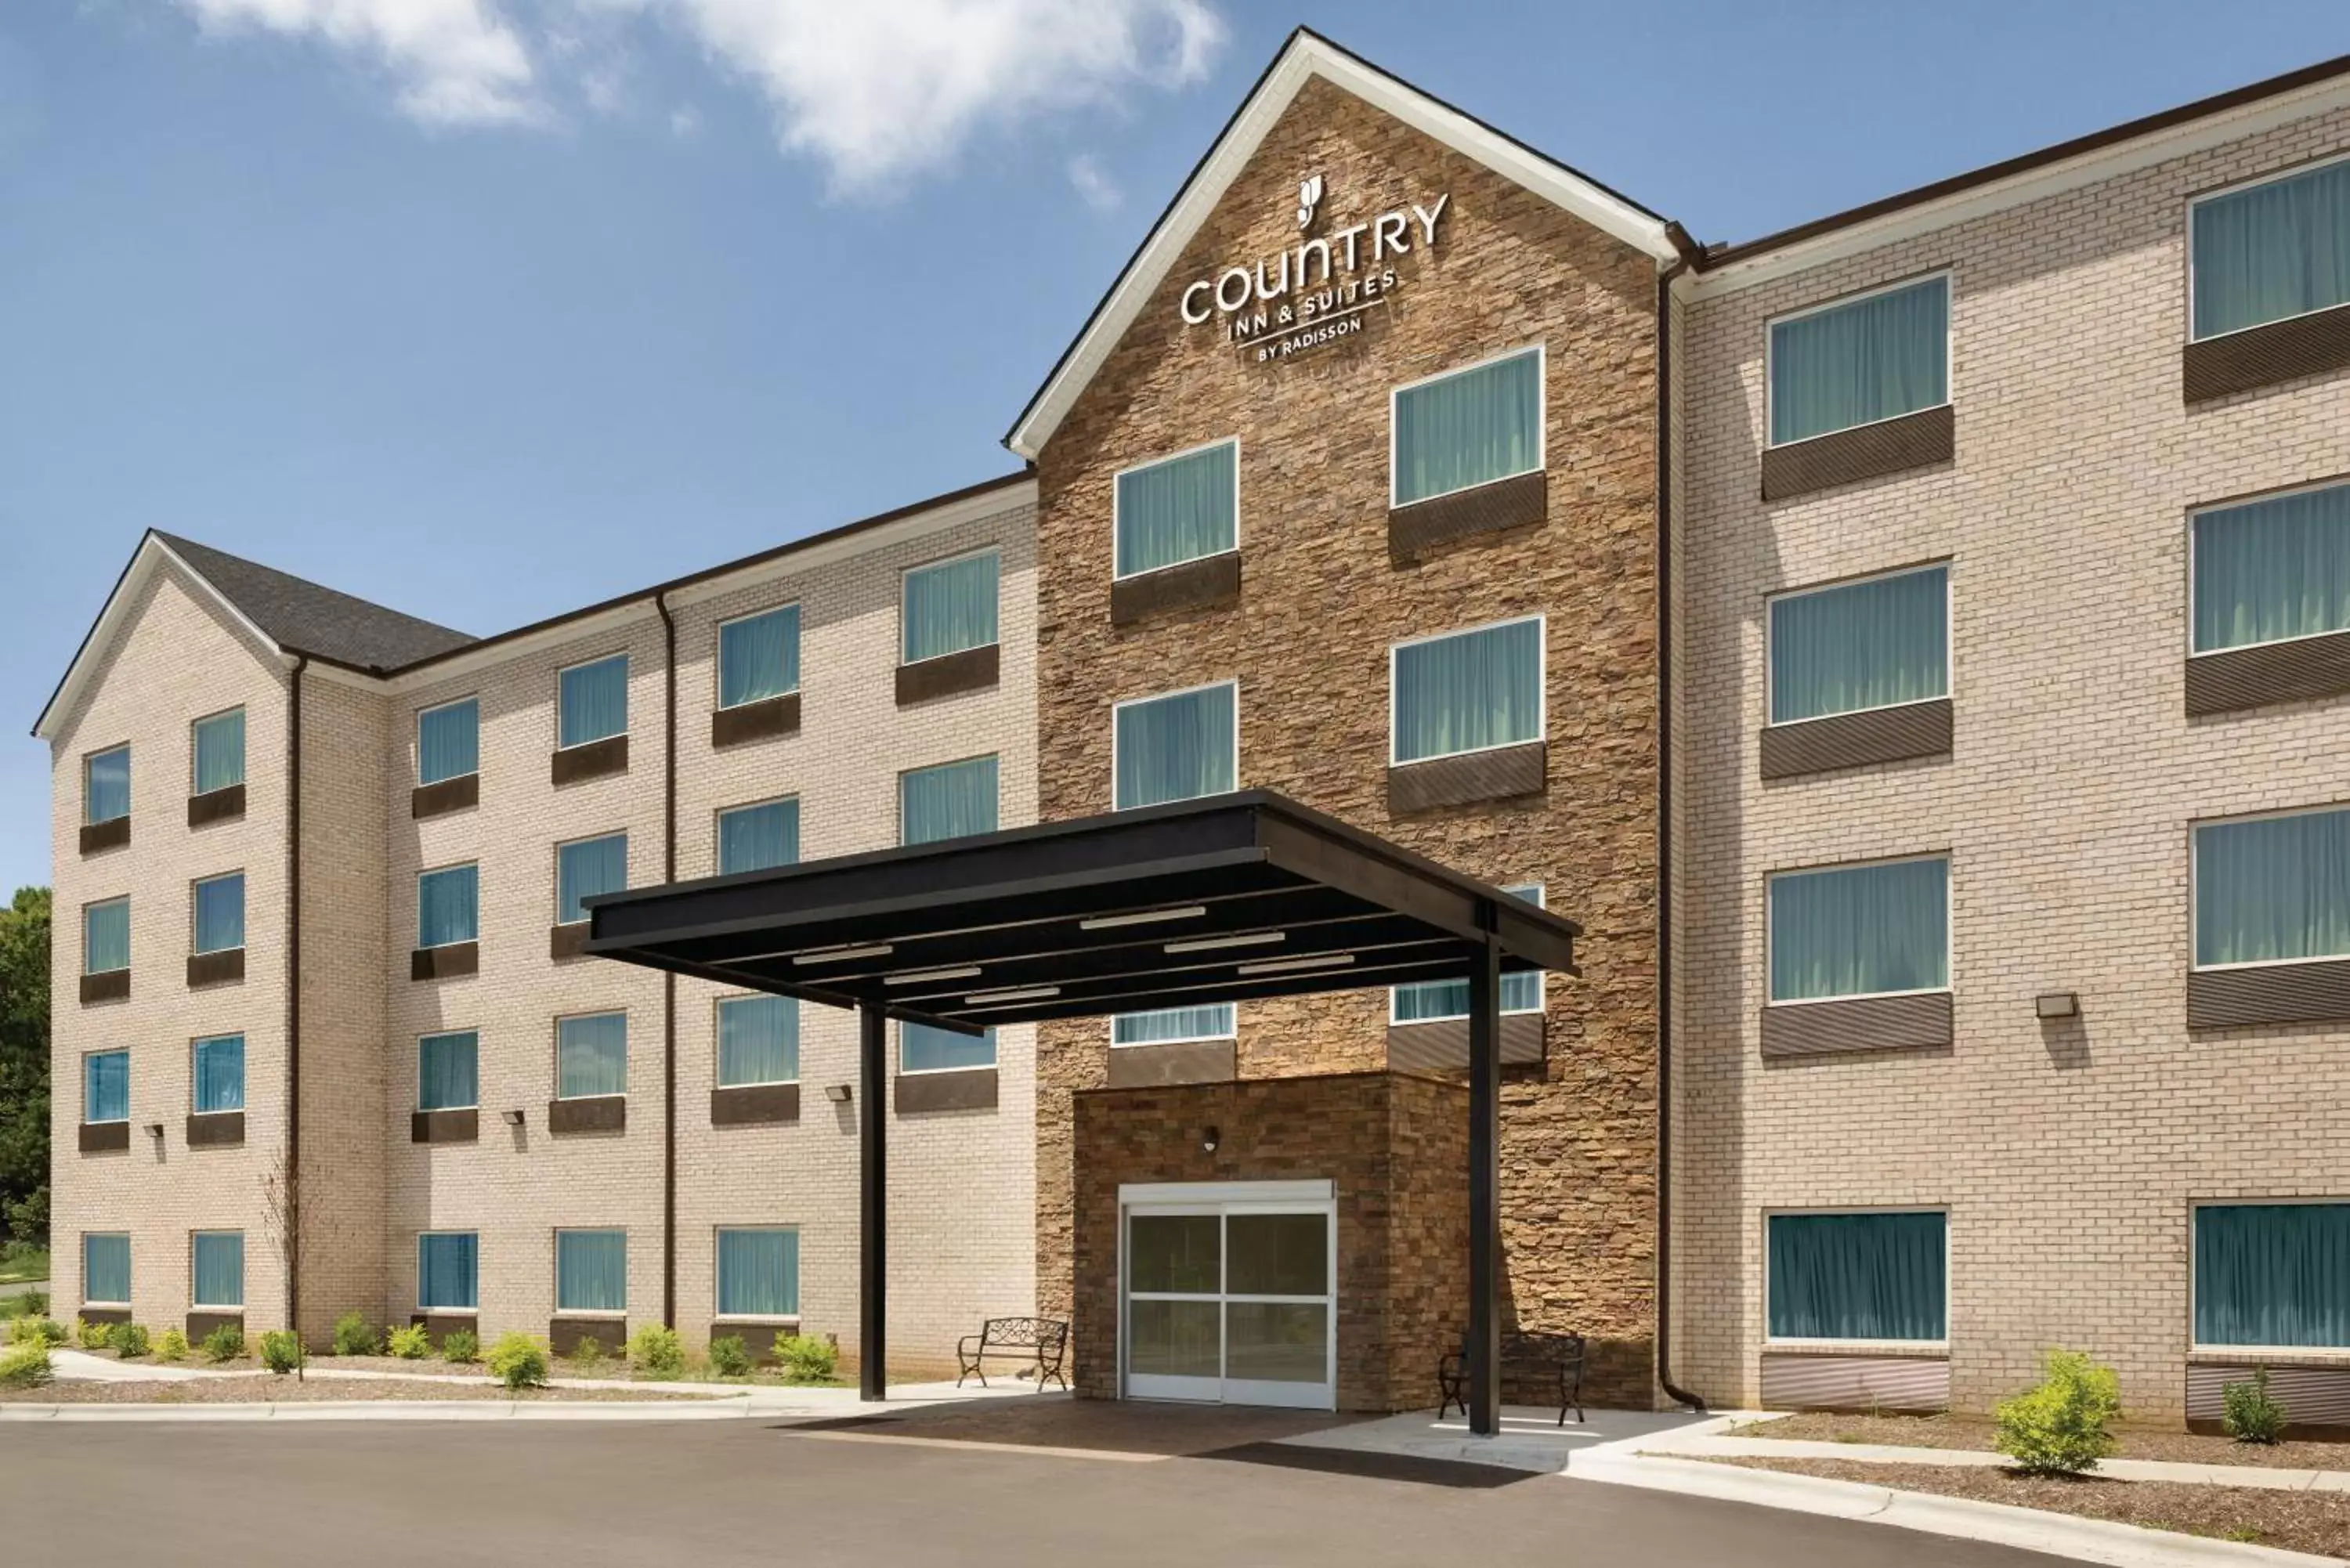 Property building in Country Inn & Suites by Radisson, Greensboro, NC